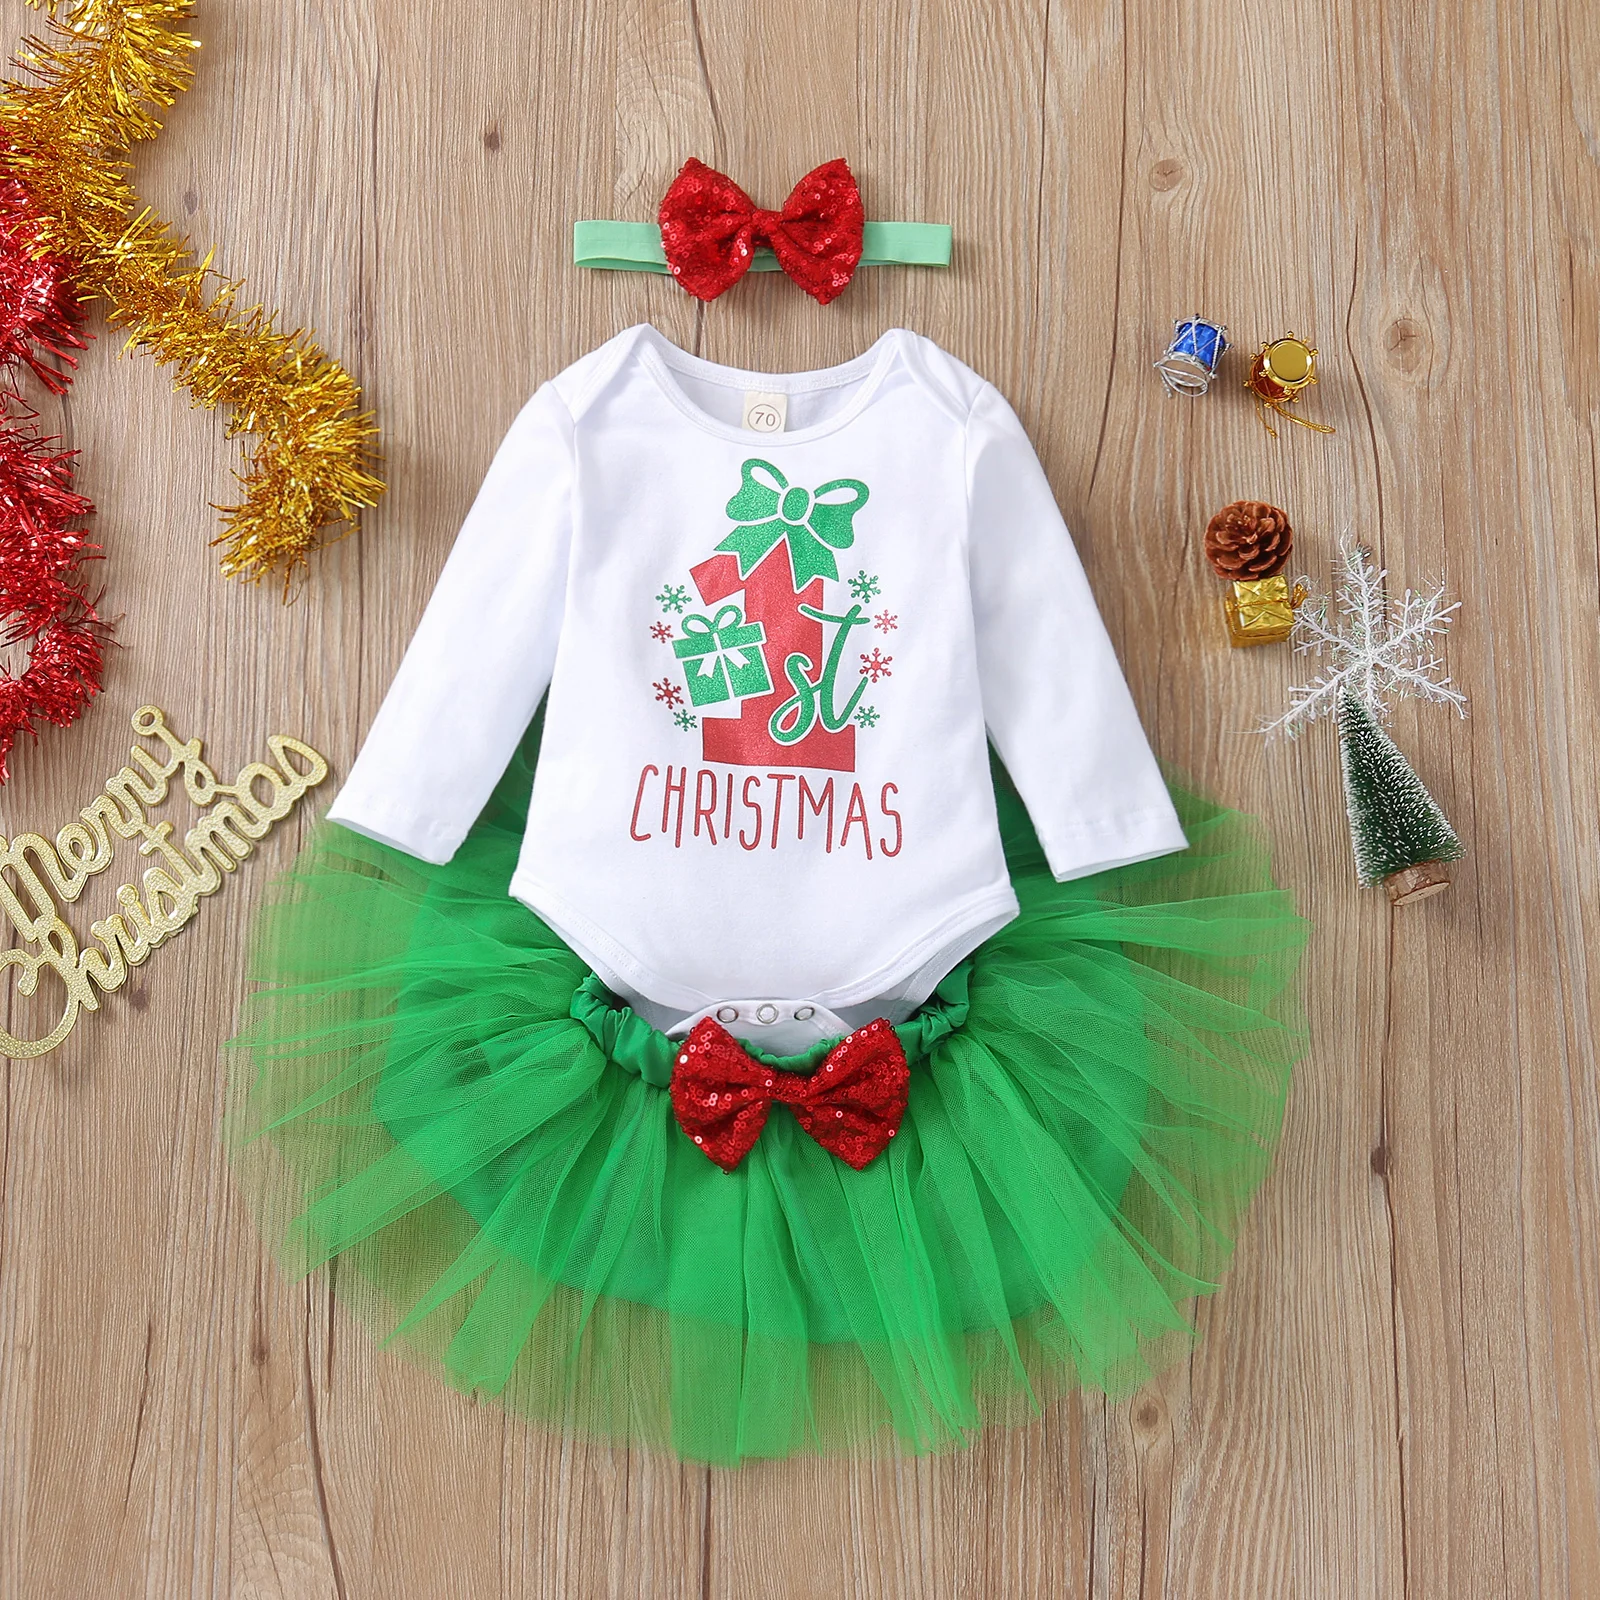 Shan-S Baby Girls Christmas Costume Colthing Infant Toddler Romper Jumpsuit Outfits Shirt Tops Xmas Reindeer Printed Skirt Dress Outfits 2 PCS Set